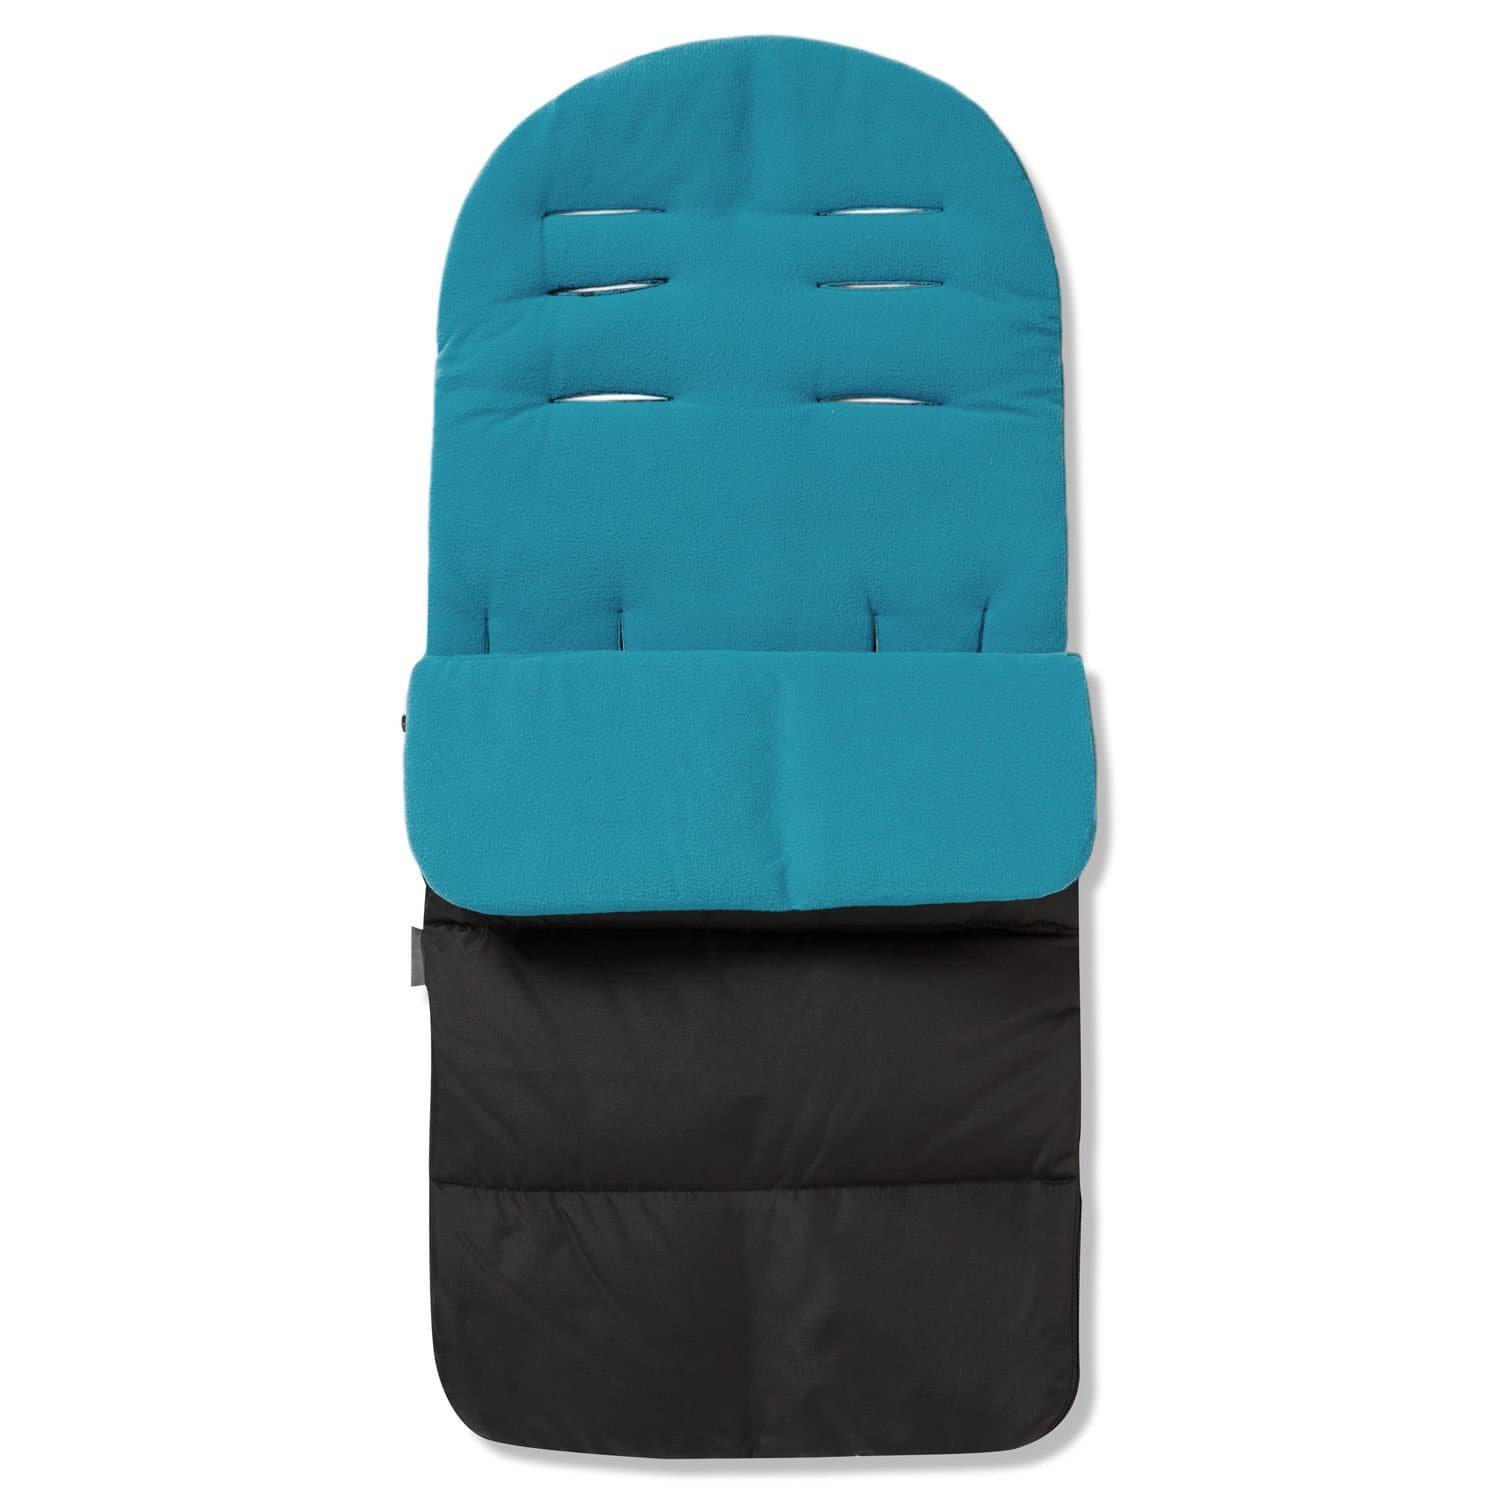 Premium Footmuff / Cosy Toes Compatible with Out 'n' About - Ocean Blue / Fits All Models | For Your Little One